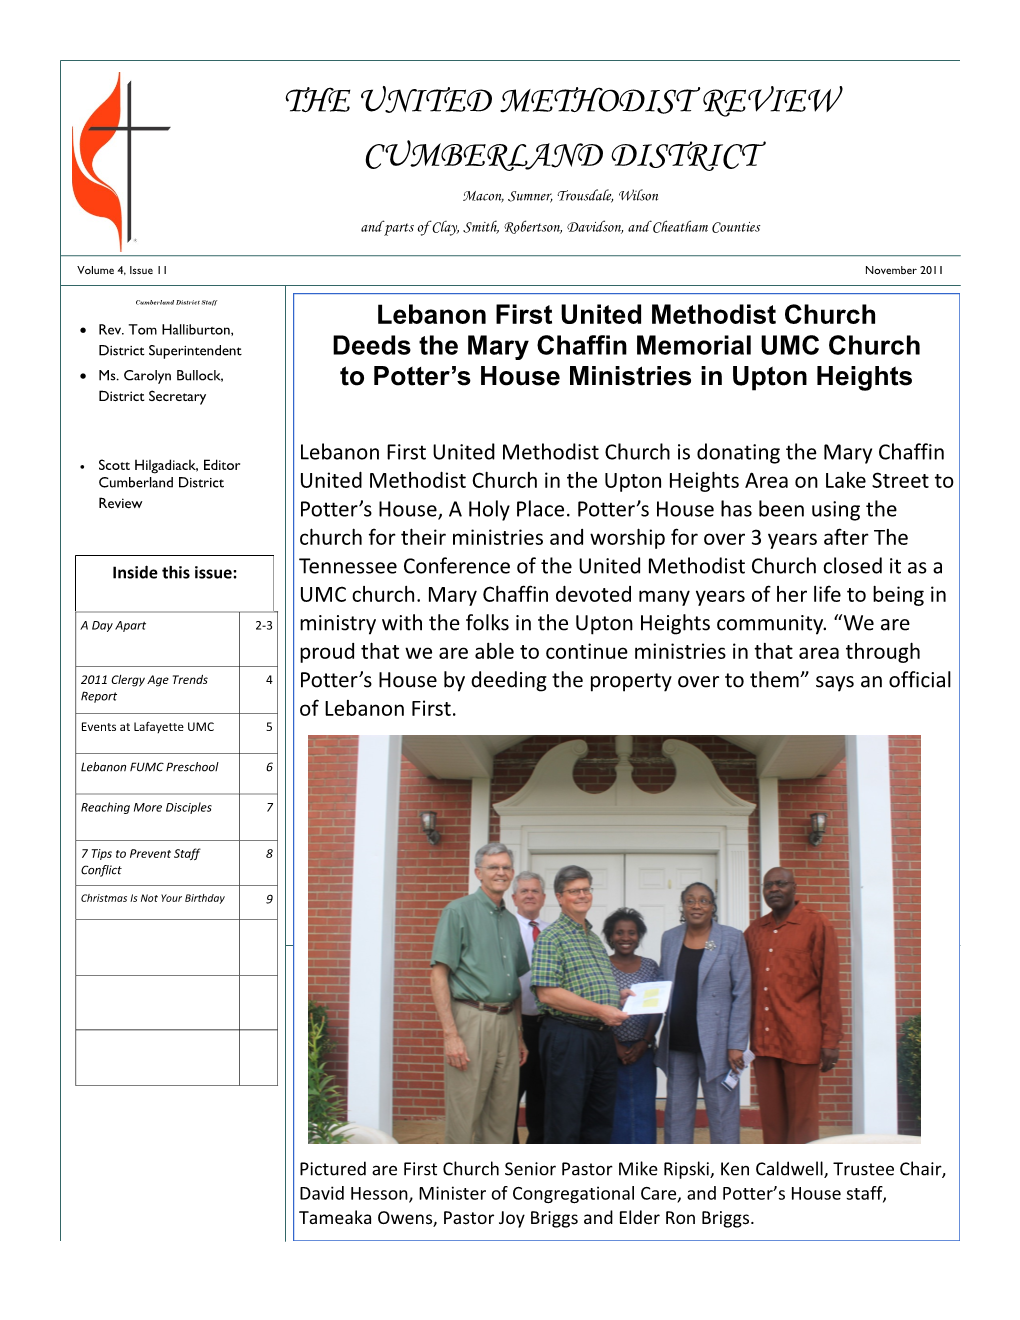 THE UNITED METHODIST REVIEW CUMBERLAND DISTRICT Macon, Sumner, Trousdale, Wilson and Parts of Clay, Smith, Robertson, Davidson, and Cheatham Counties